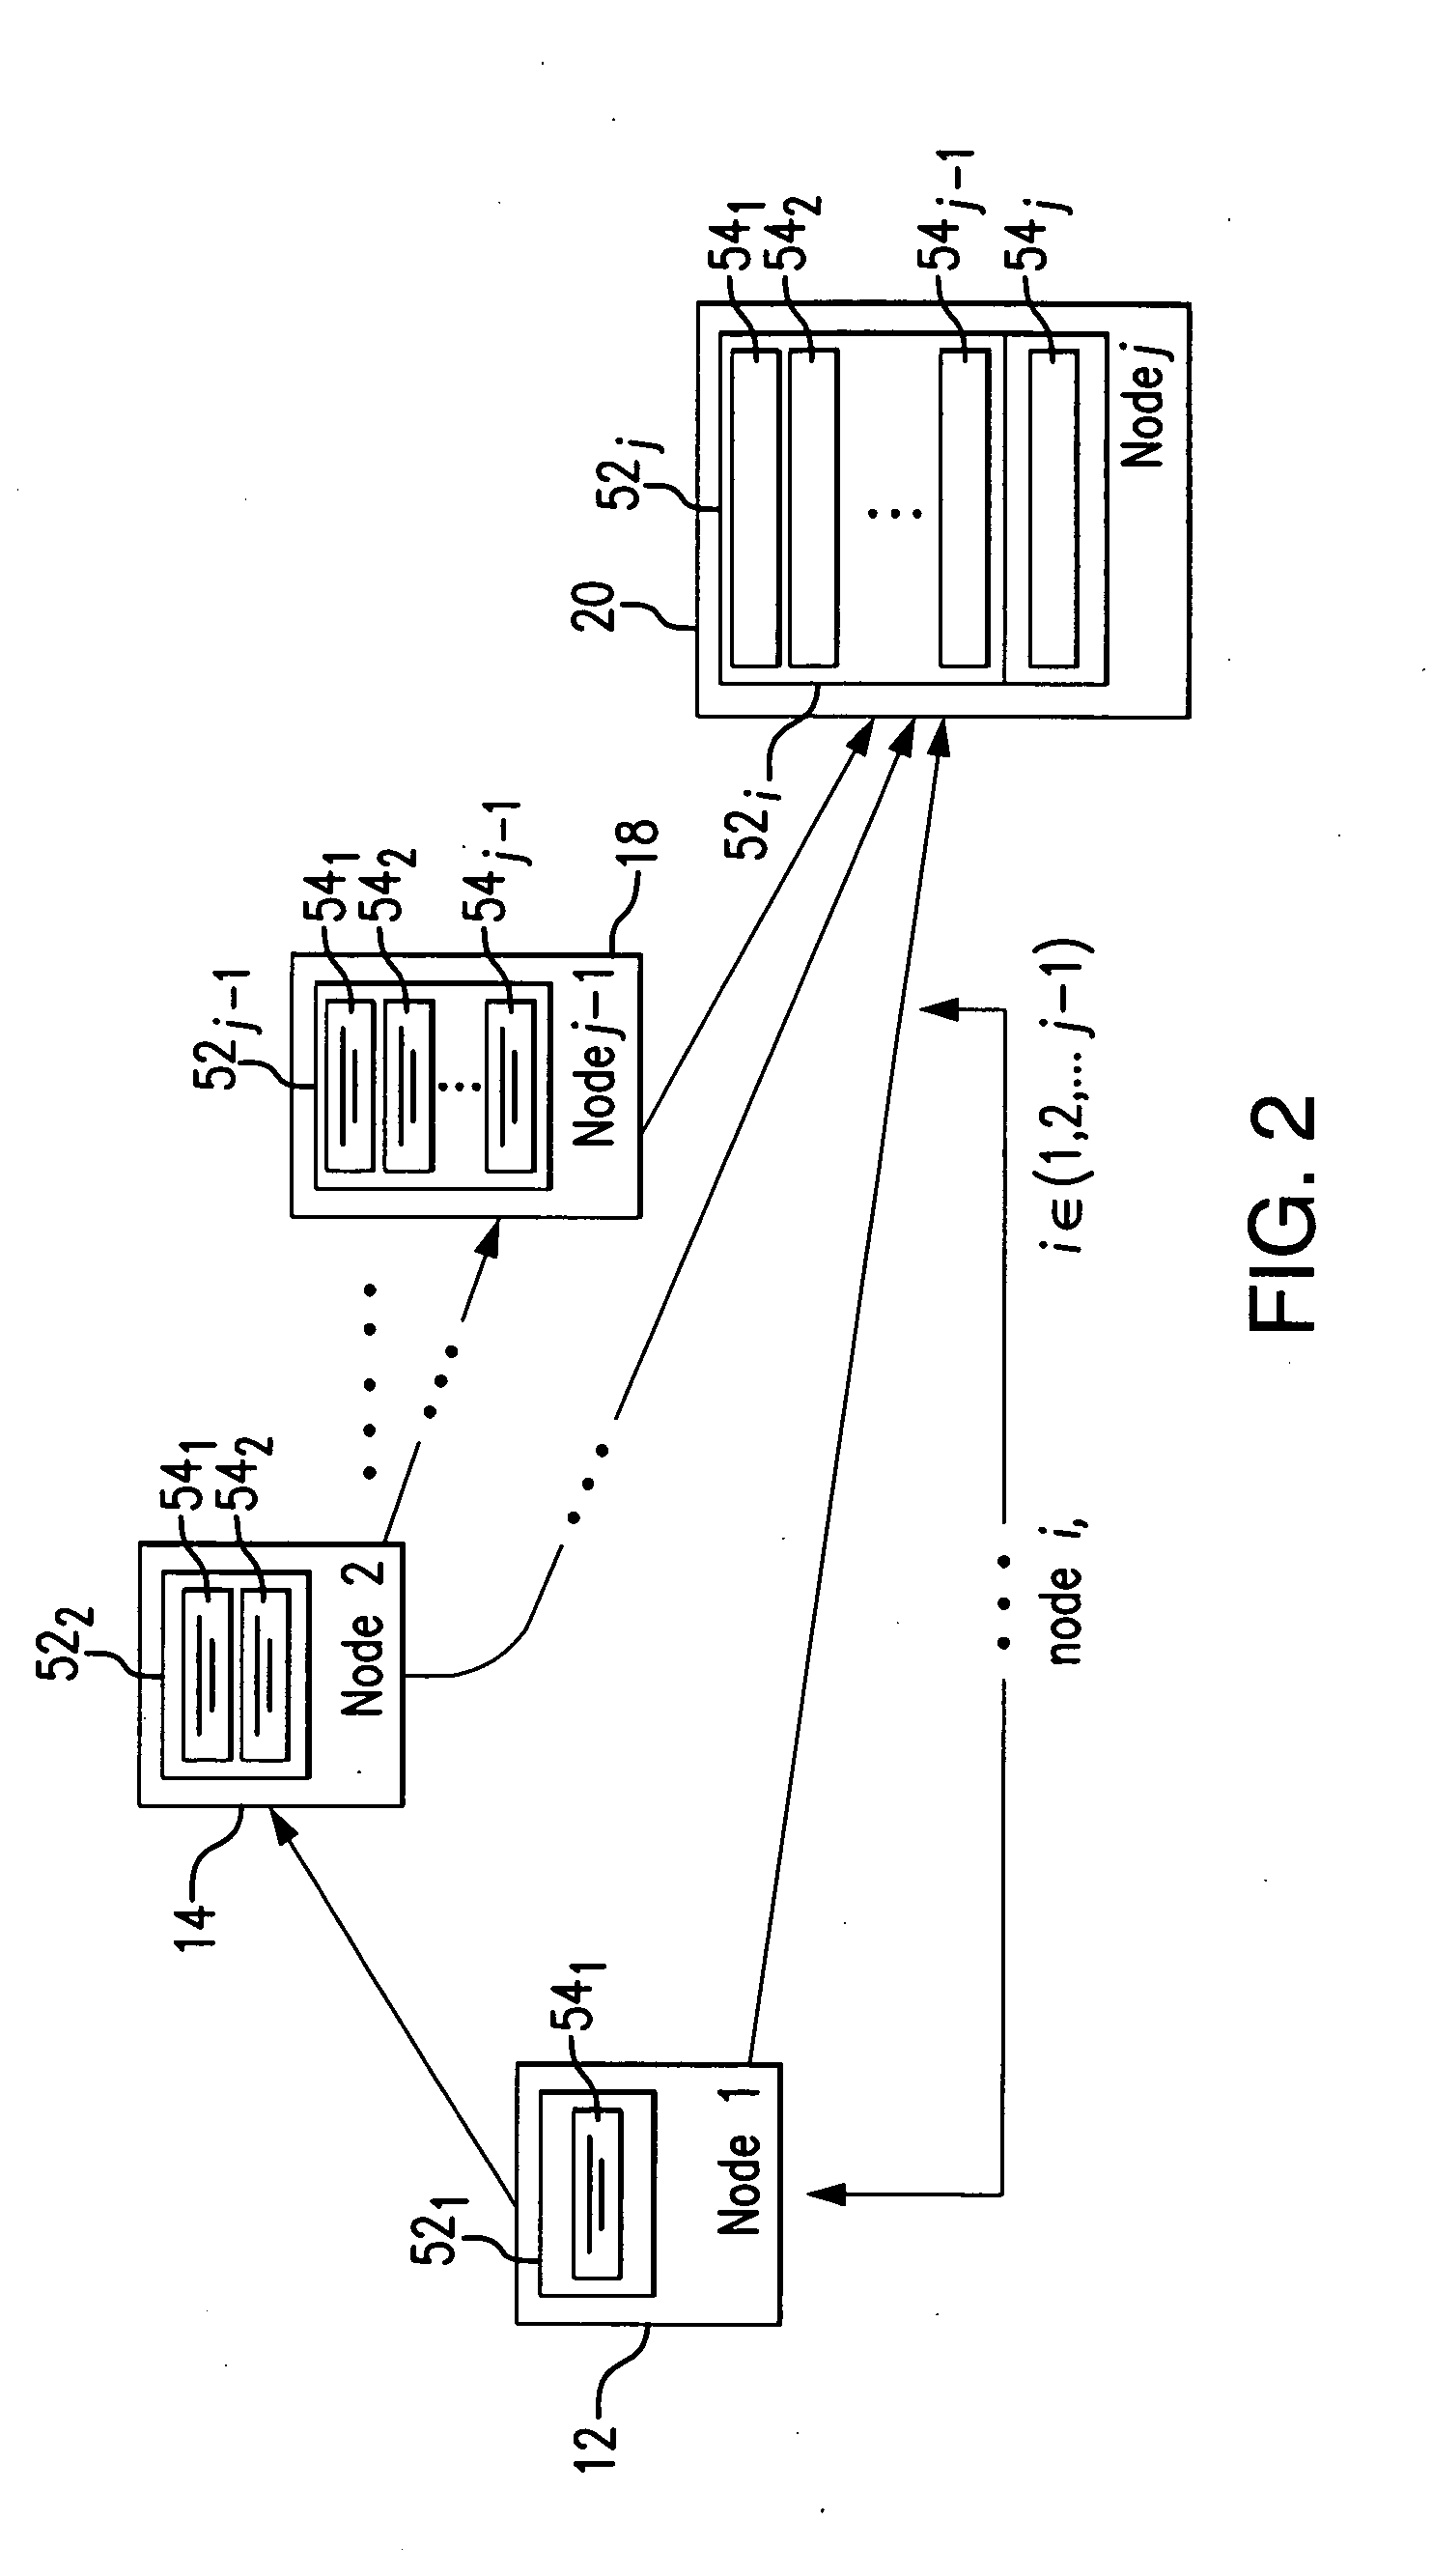 Method and system for cooperative transmission in wireless multi-hop networks